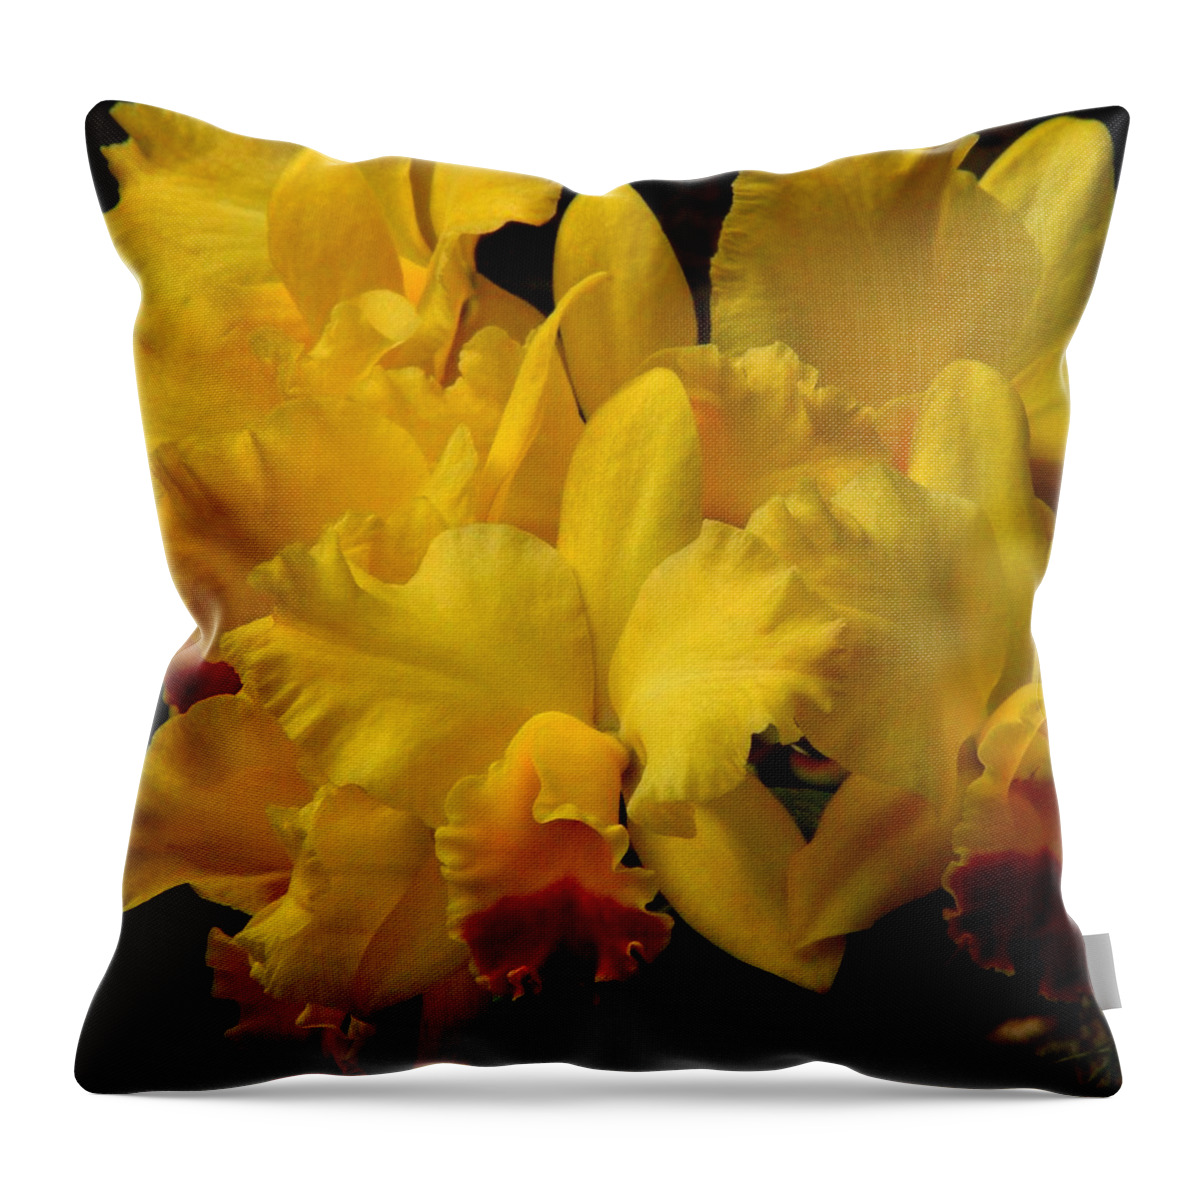 Fine Art Throw Pillow featuring the photograph Yellow Folds by Rodney Lee Williams